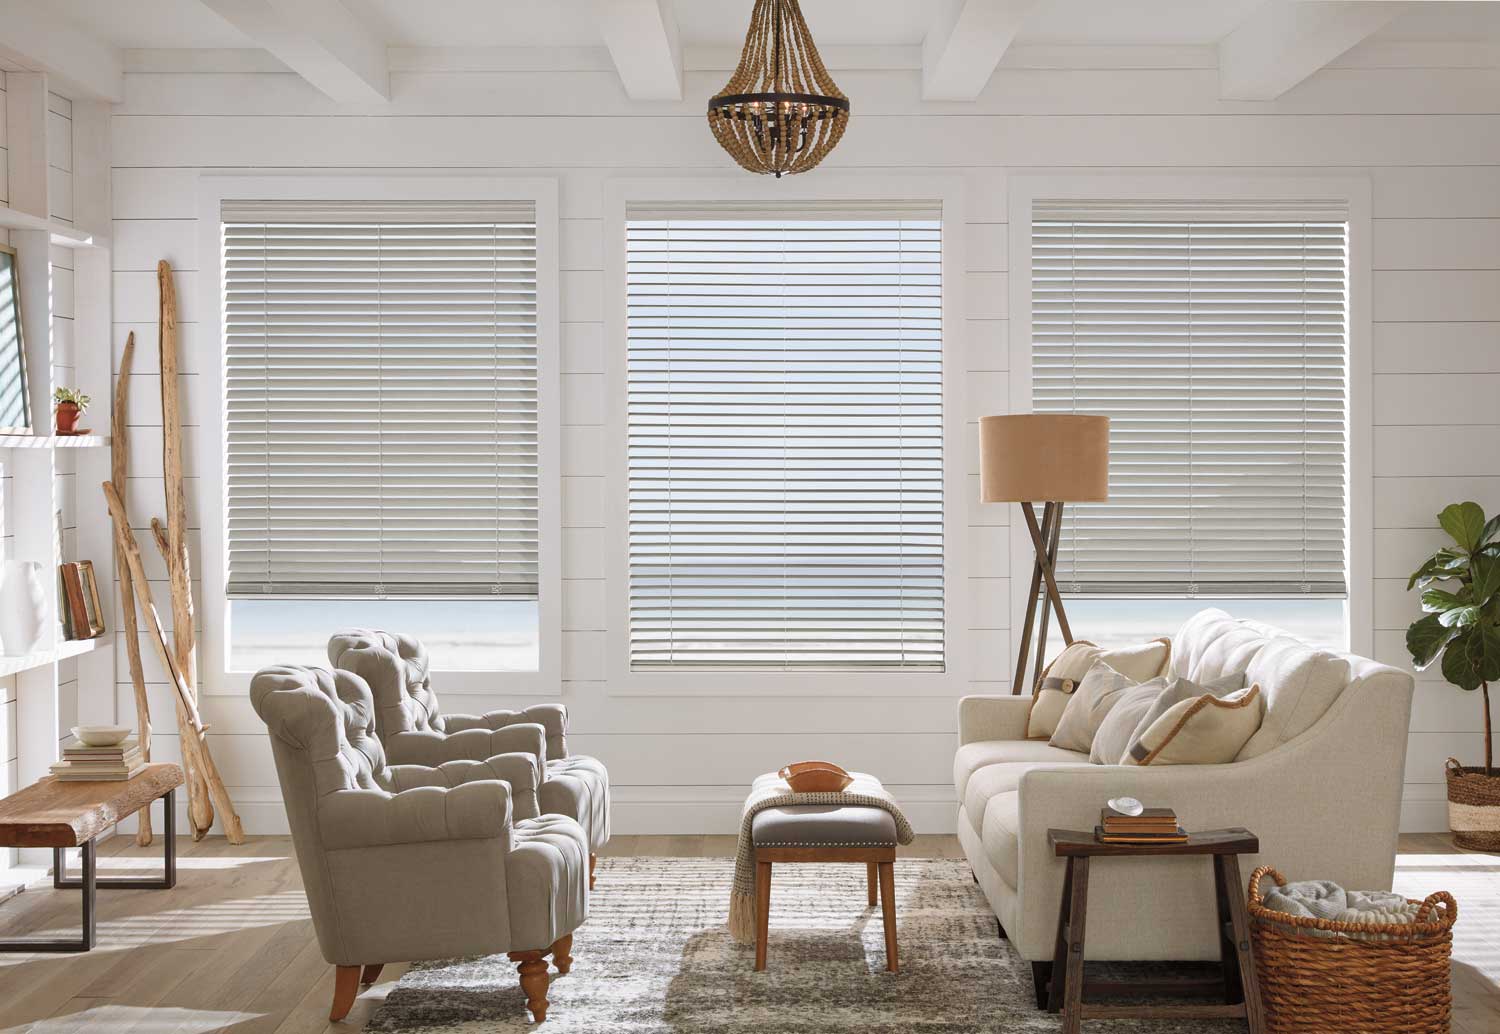 Living Room Window Blinds Ideas: A World Of Possibilities